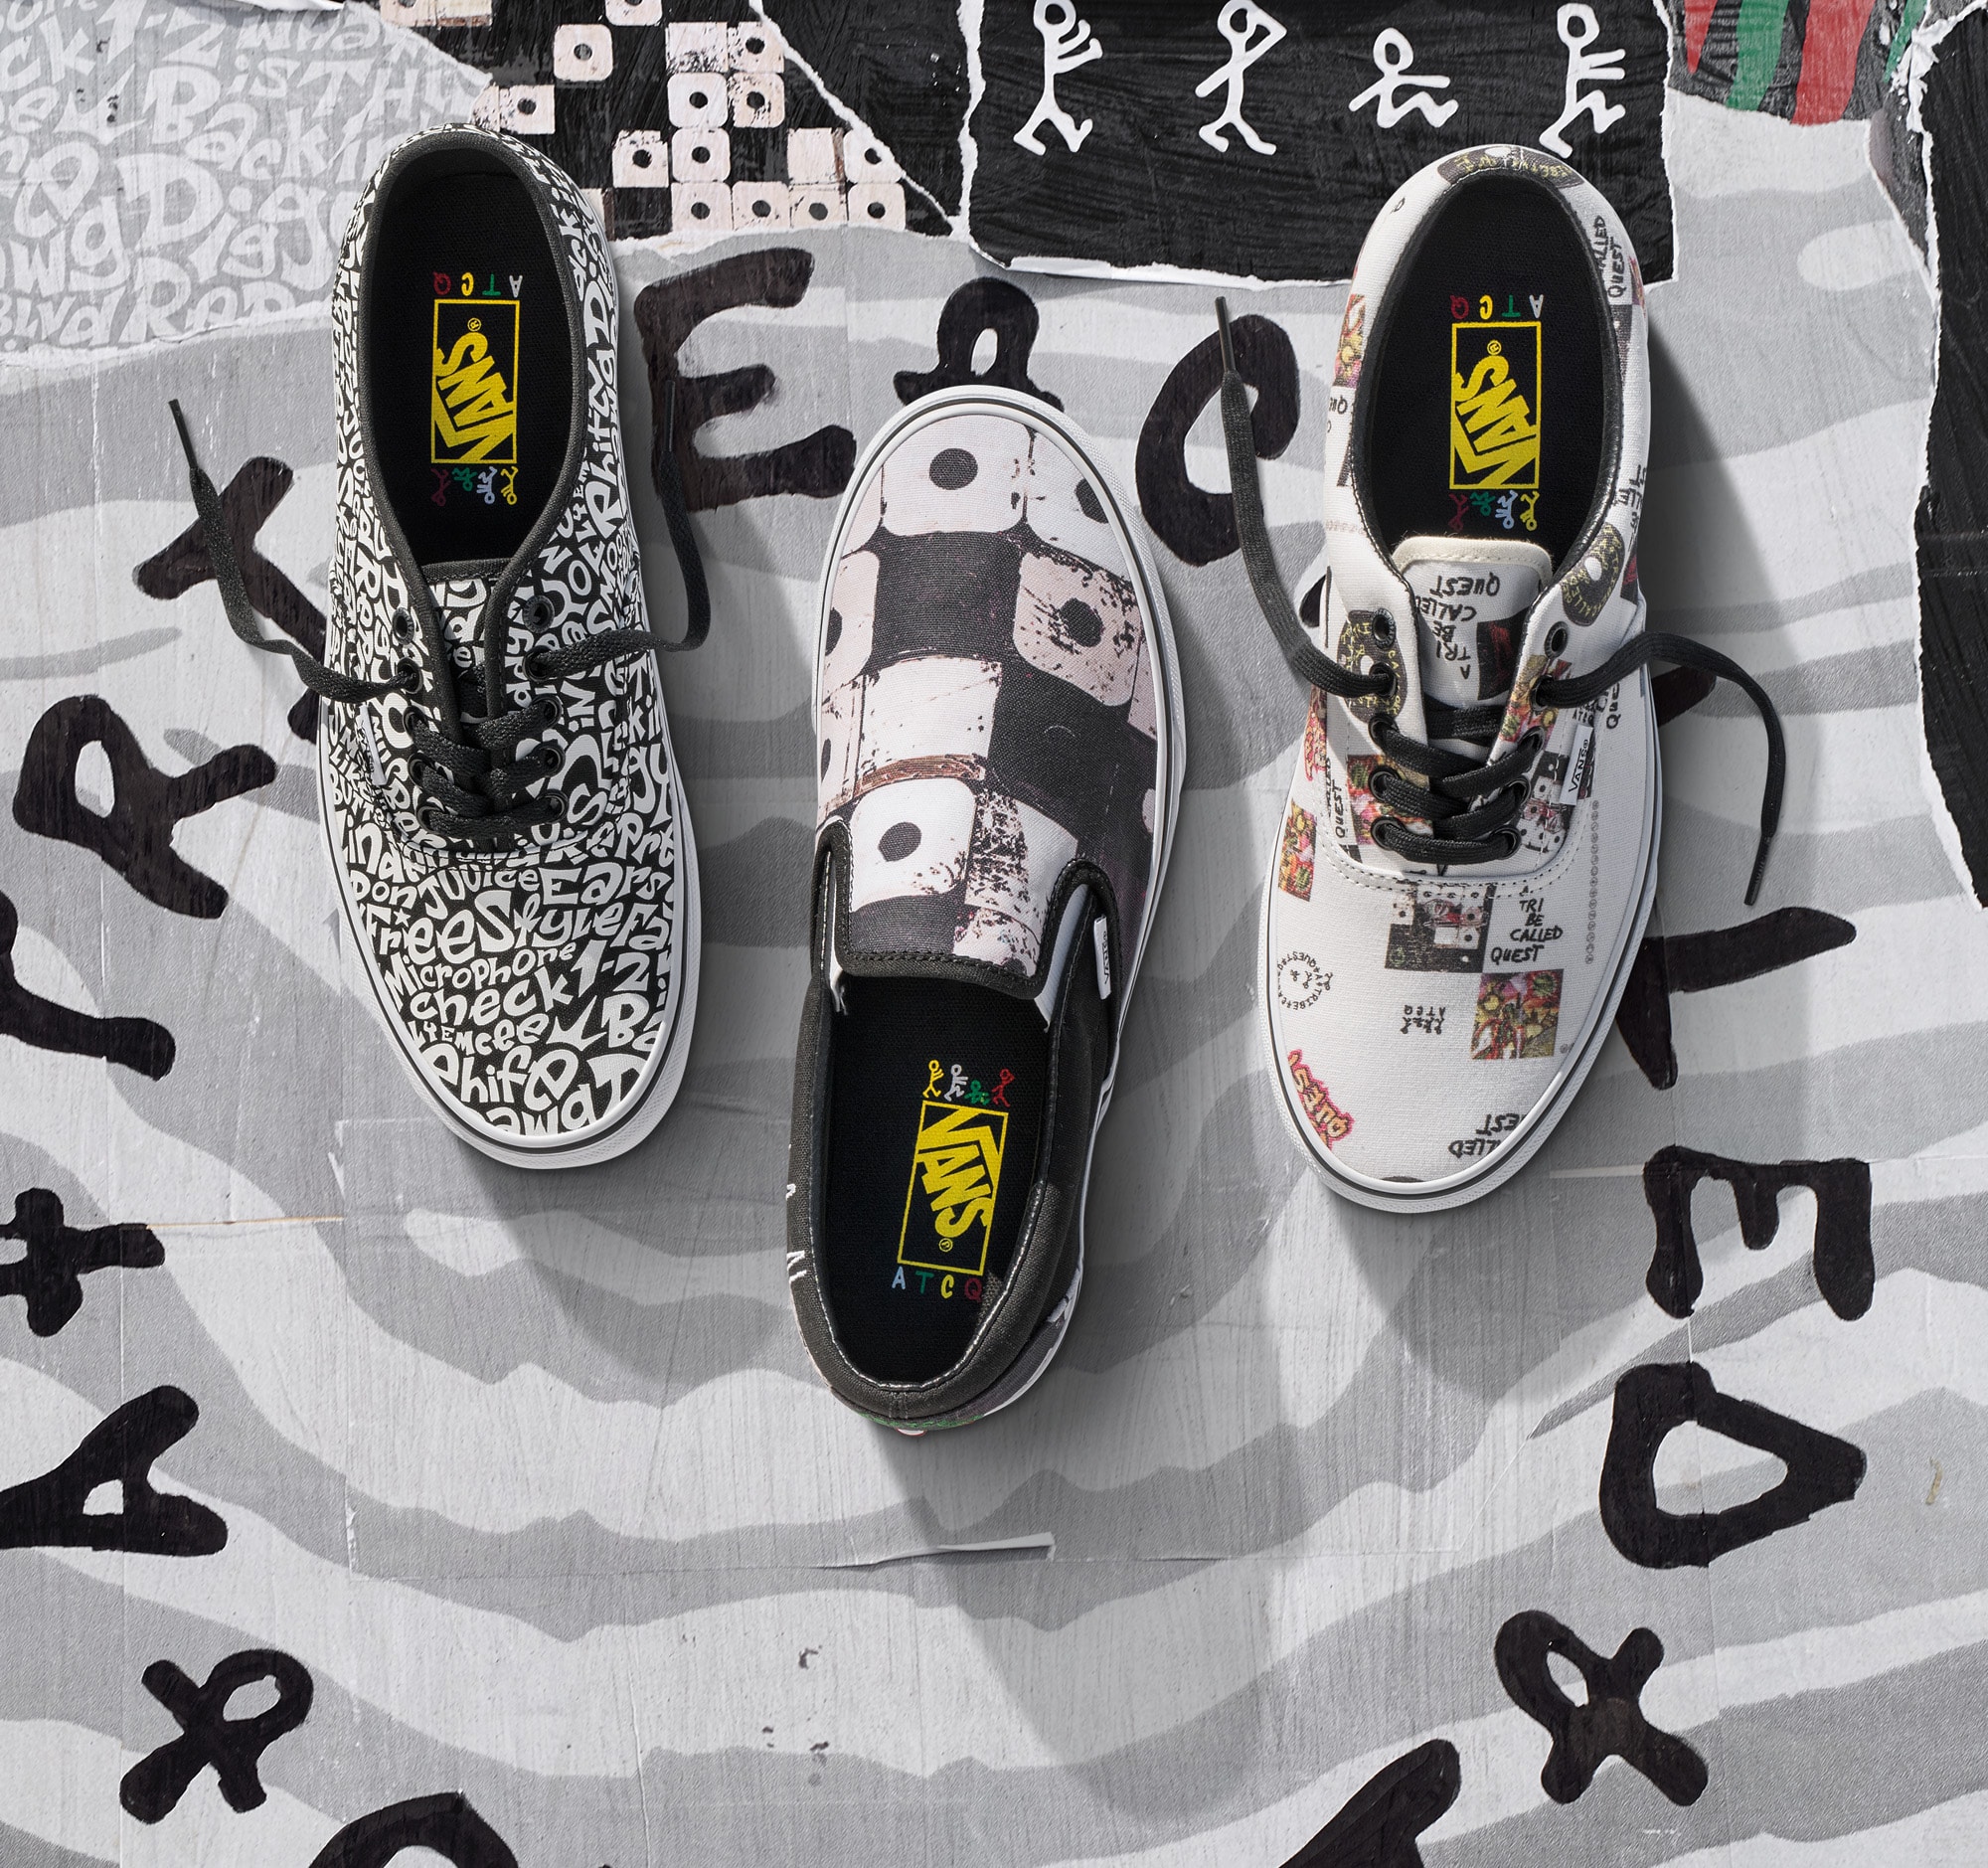 Collaboration Vans & A Tribe Called Quest